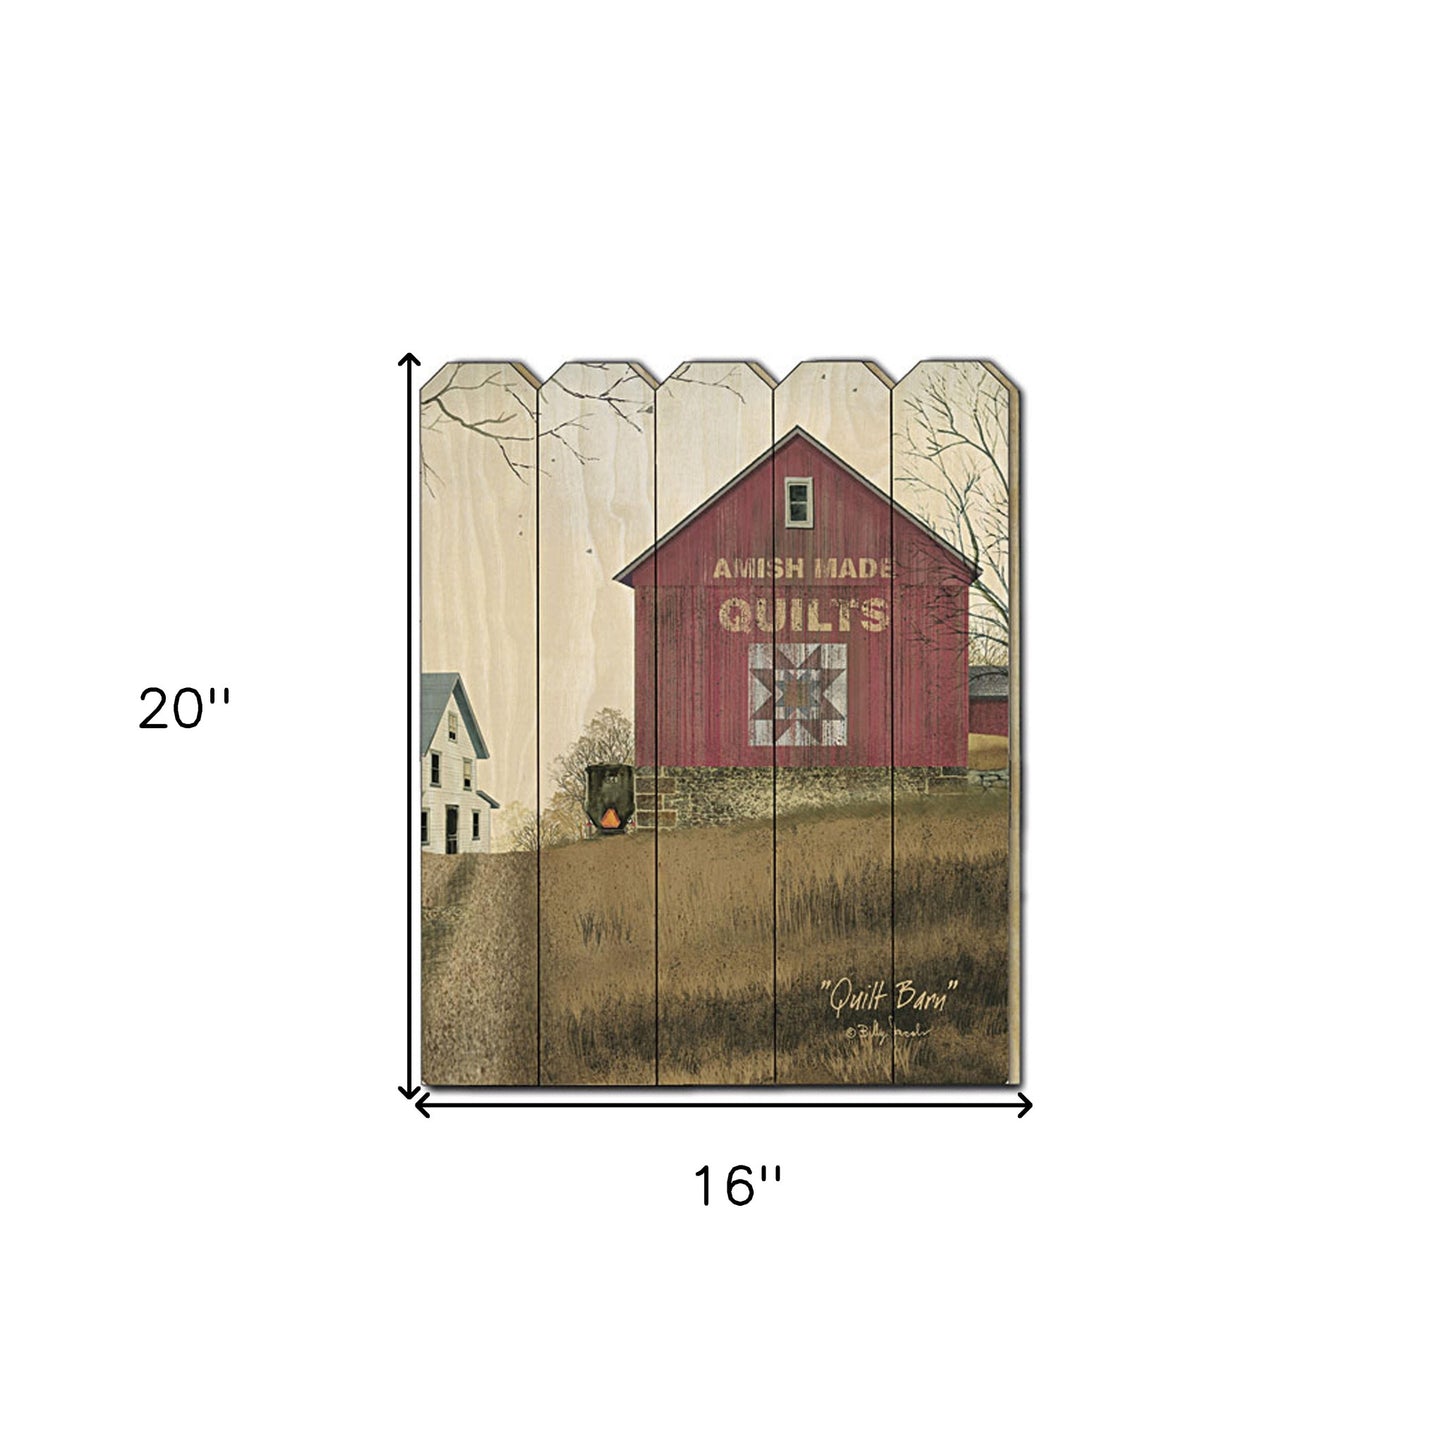 Rustic Amish Quilt Barn 1 Wood Picket Fence Wall Art